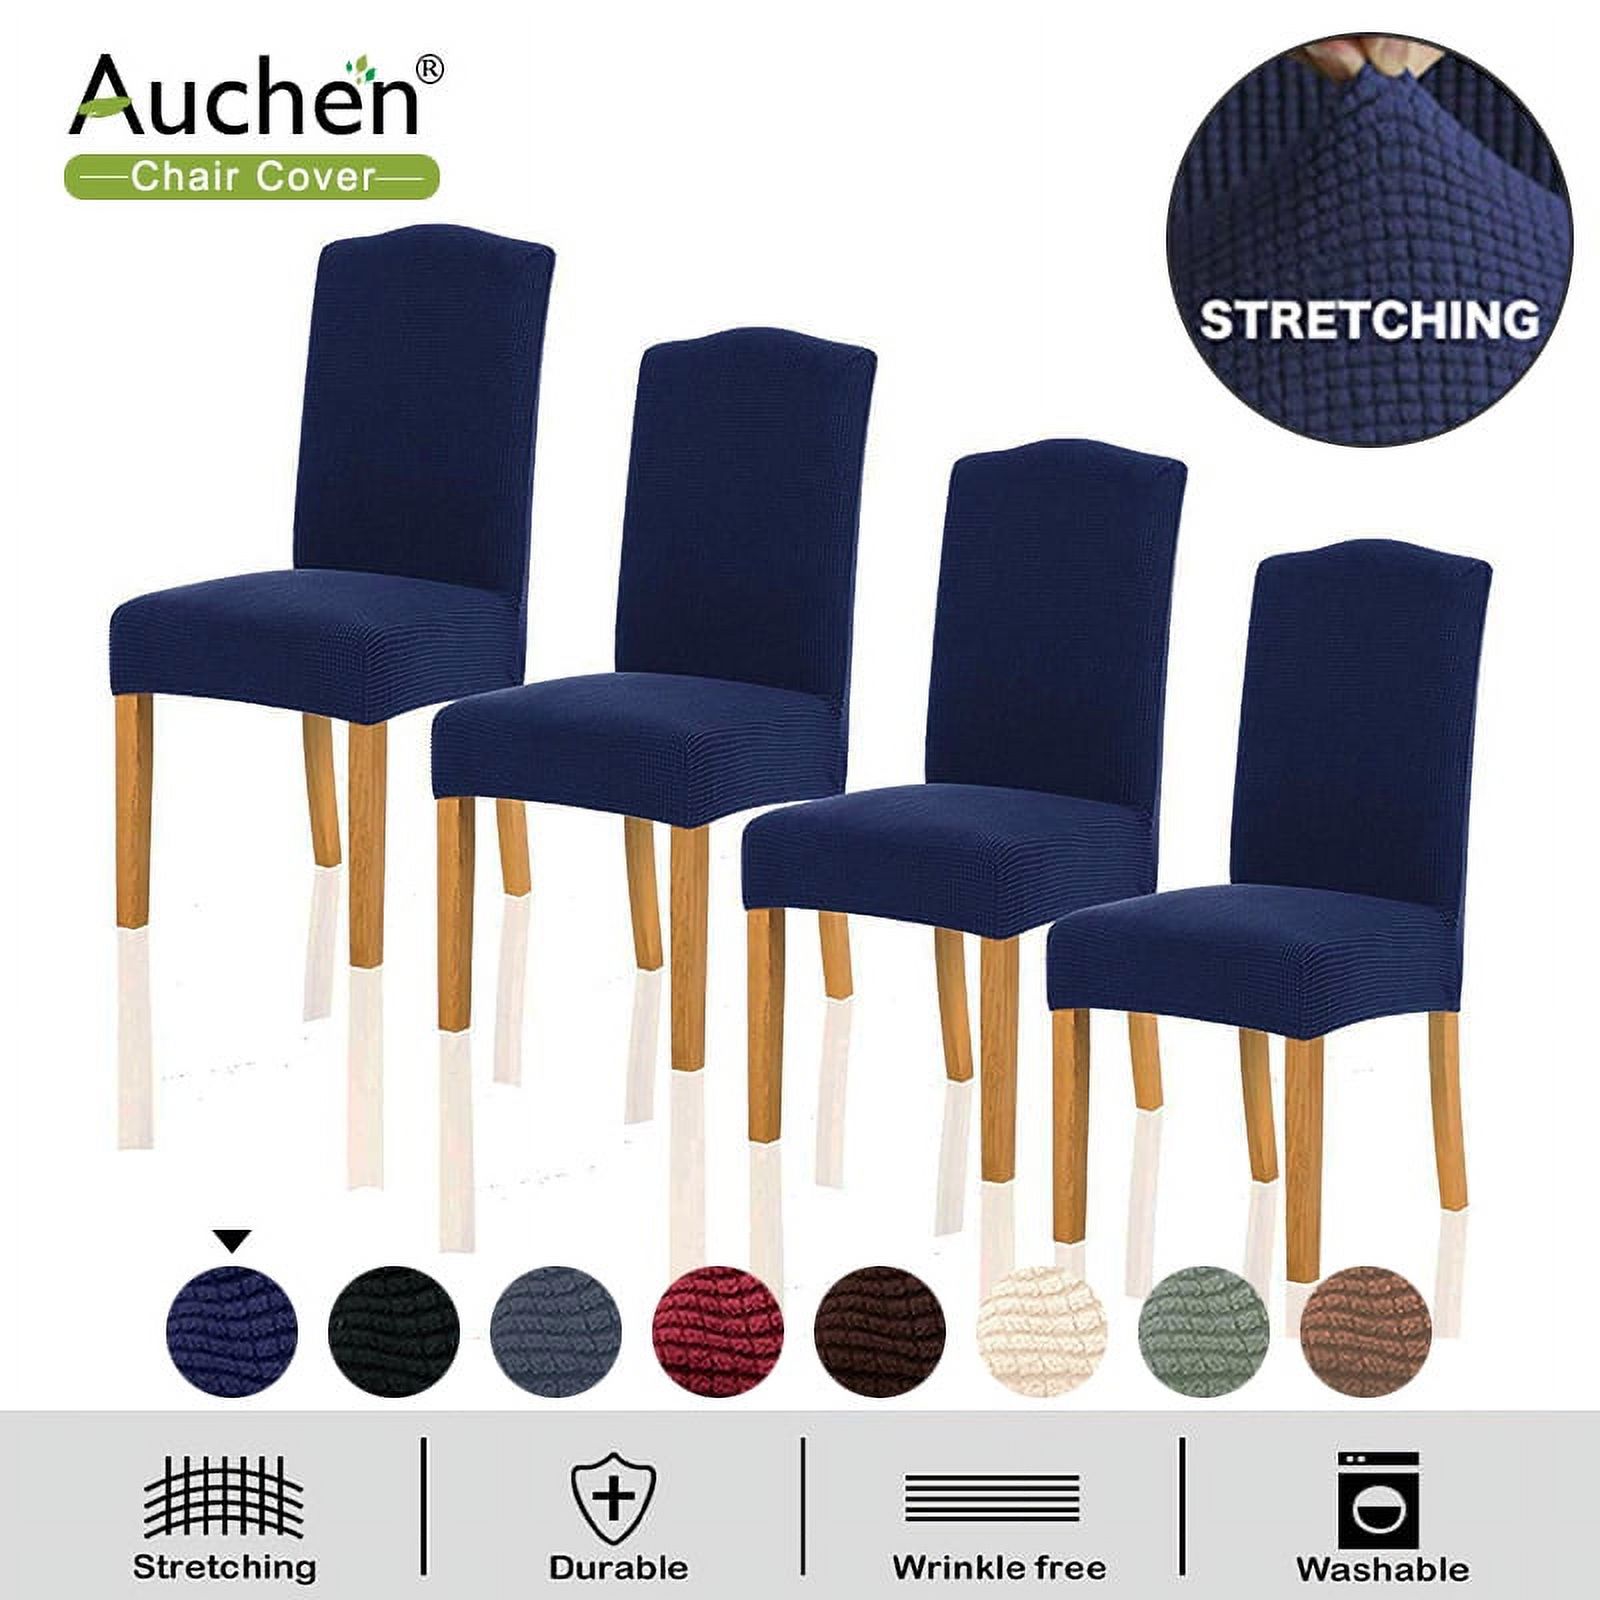 Chair Covers, AUCHEN High Stretch Dinner Chair Covers Set of 4, Stretch Furniture Protector Covers, Removable Washable Elastic Parsons Seat Case for Restaurant Hotel Ceremony (Navy) - image 1 of 6